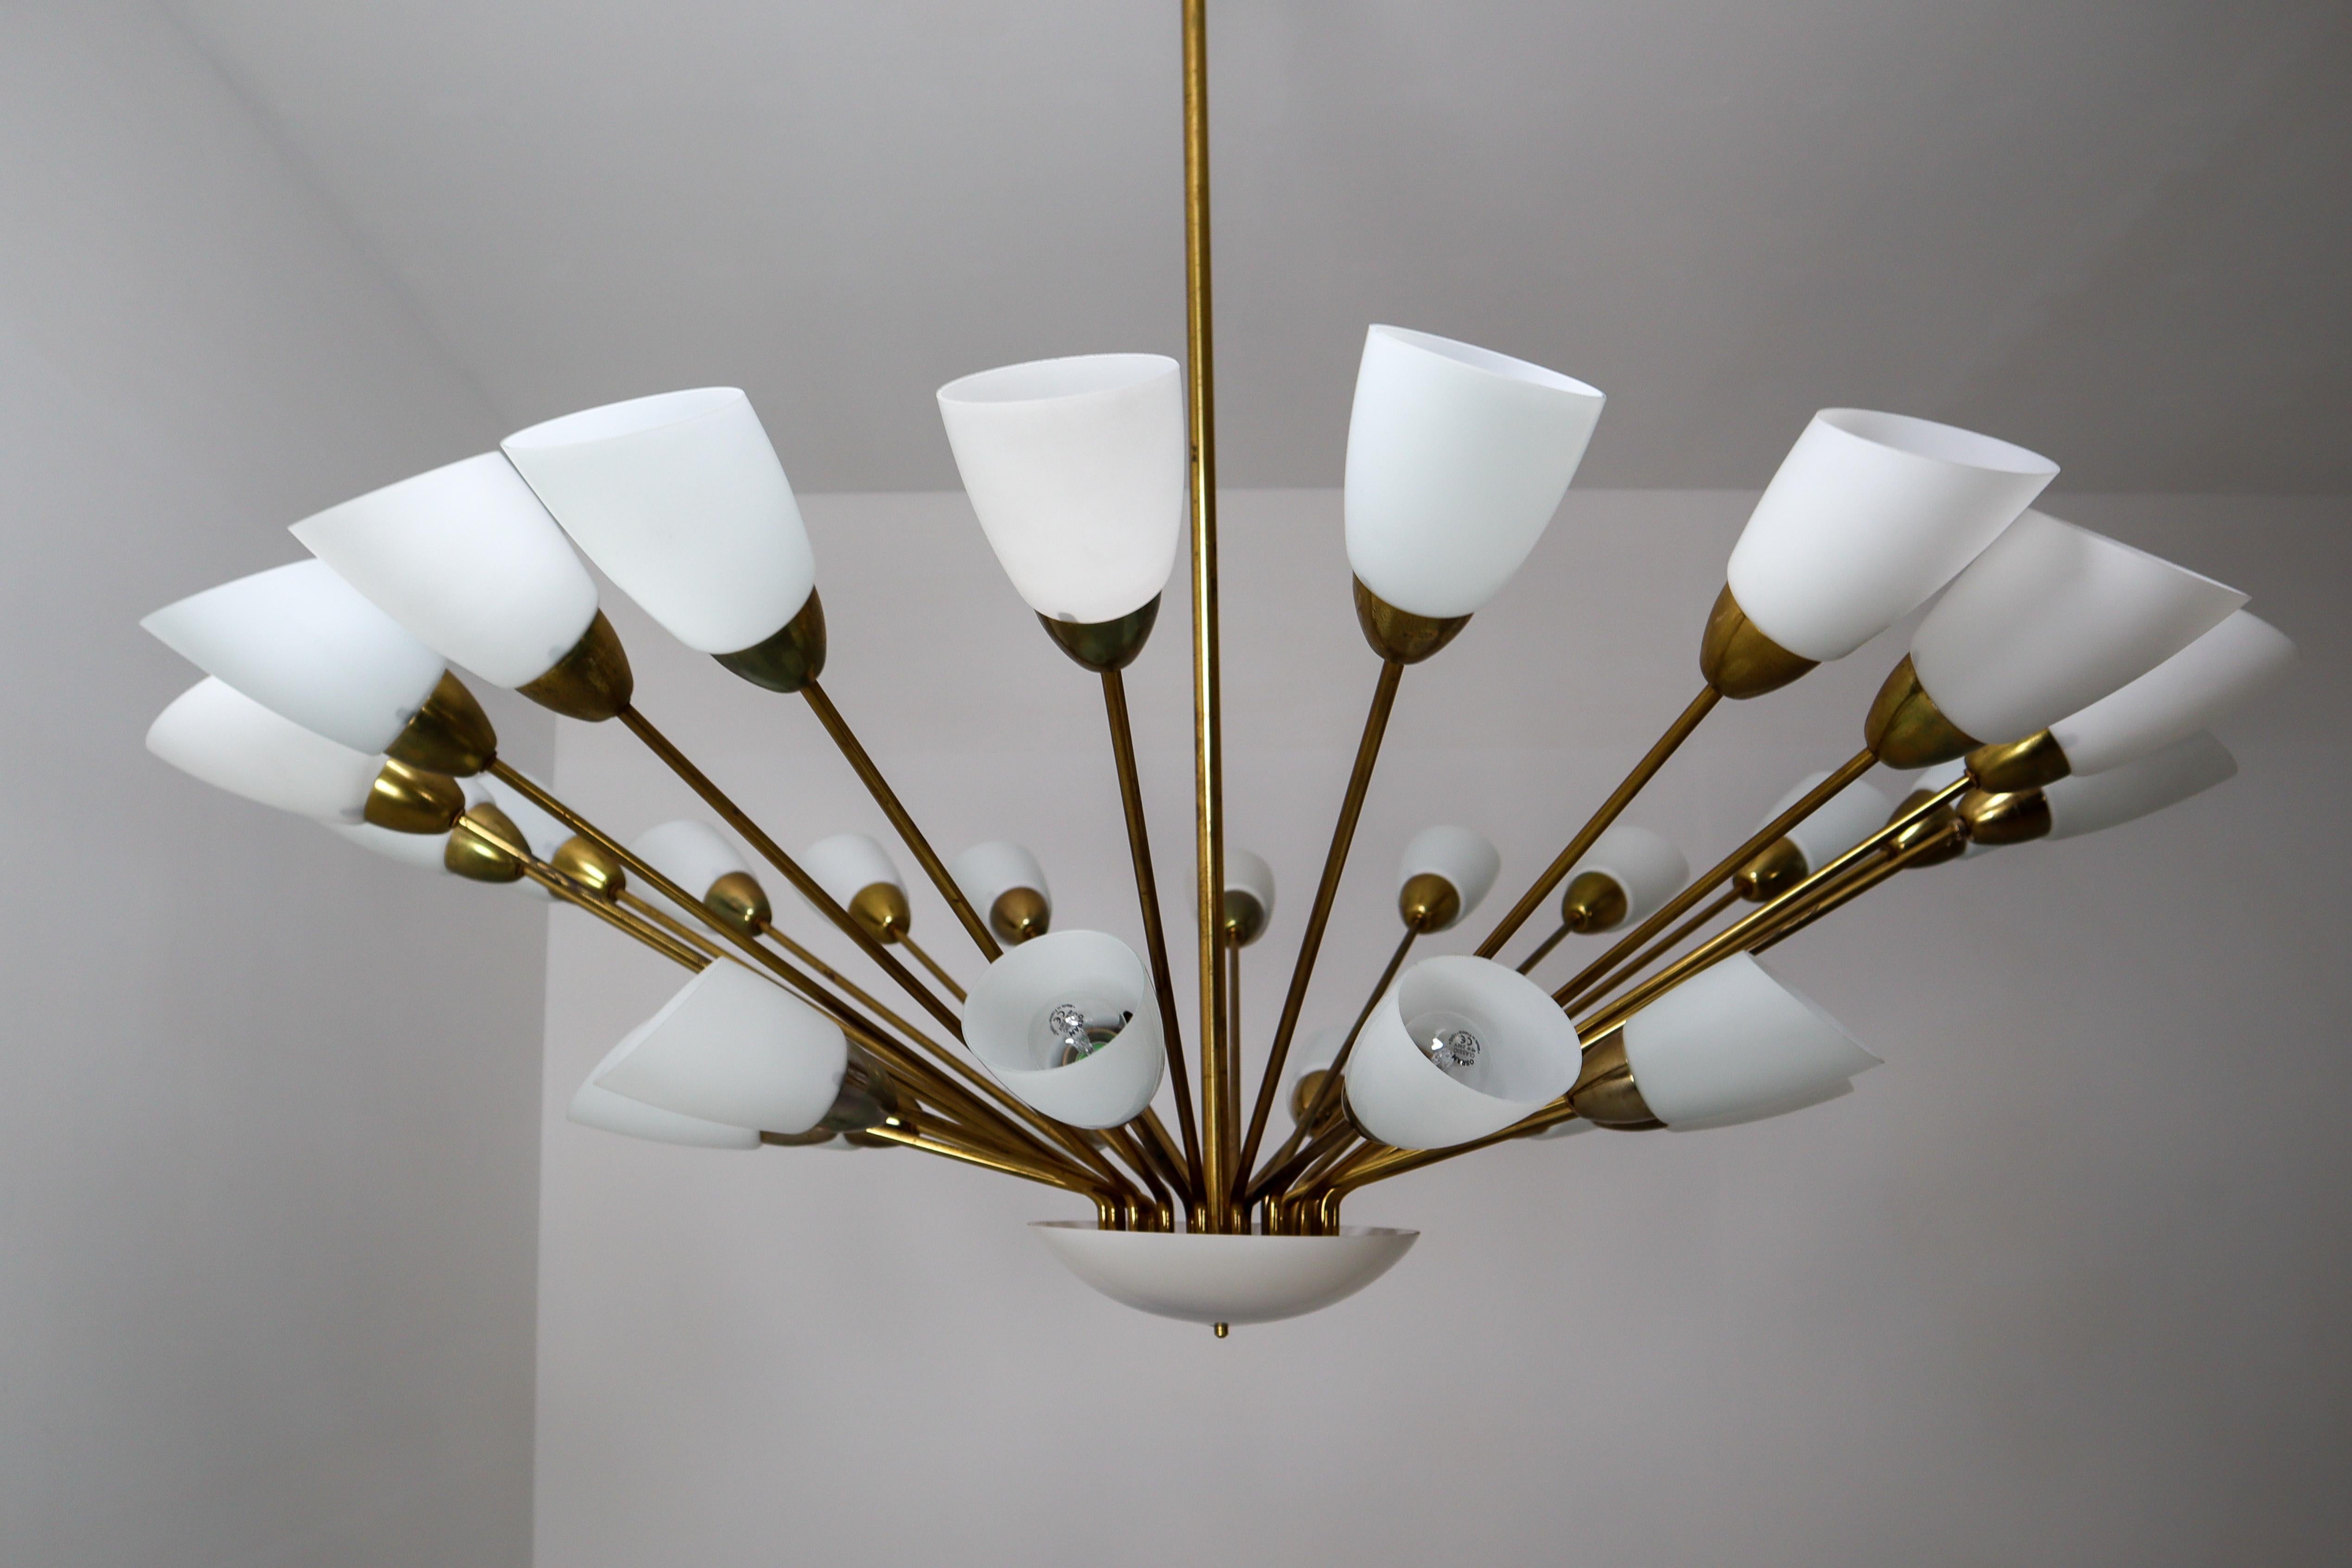 This unique midcentury modernist Sputnik features a sculptural spider form design on a brass frame with 30 (E27) sockets and holds 30 white opaline glass shades. Made in Austria, manufactured, circa 1950s. The chandelier with brass frame consist of